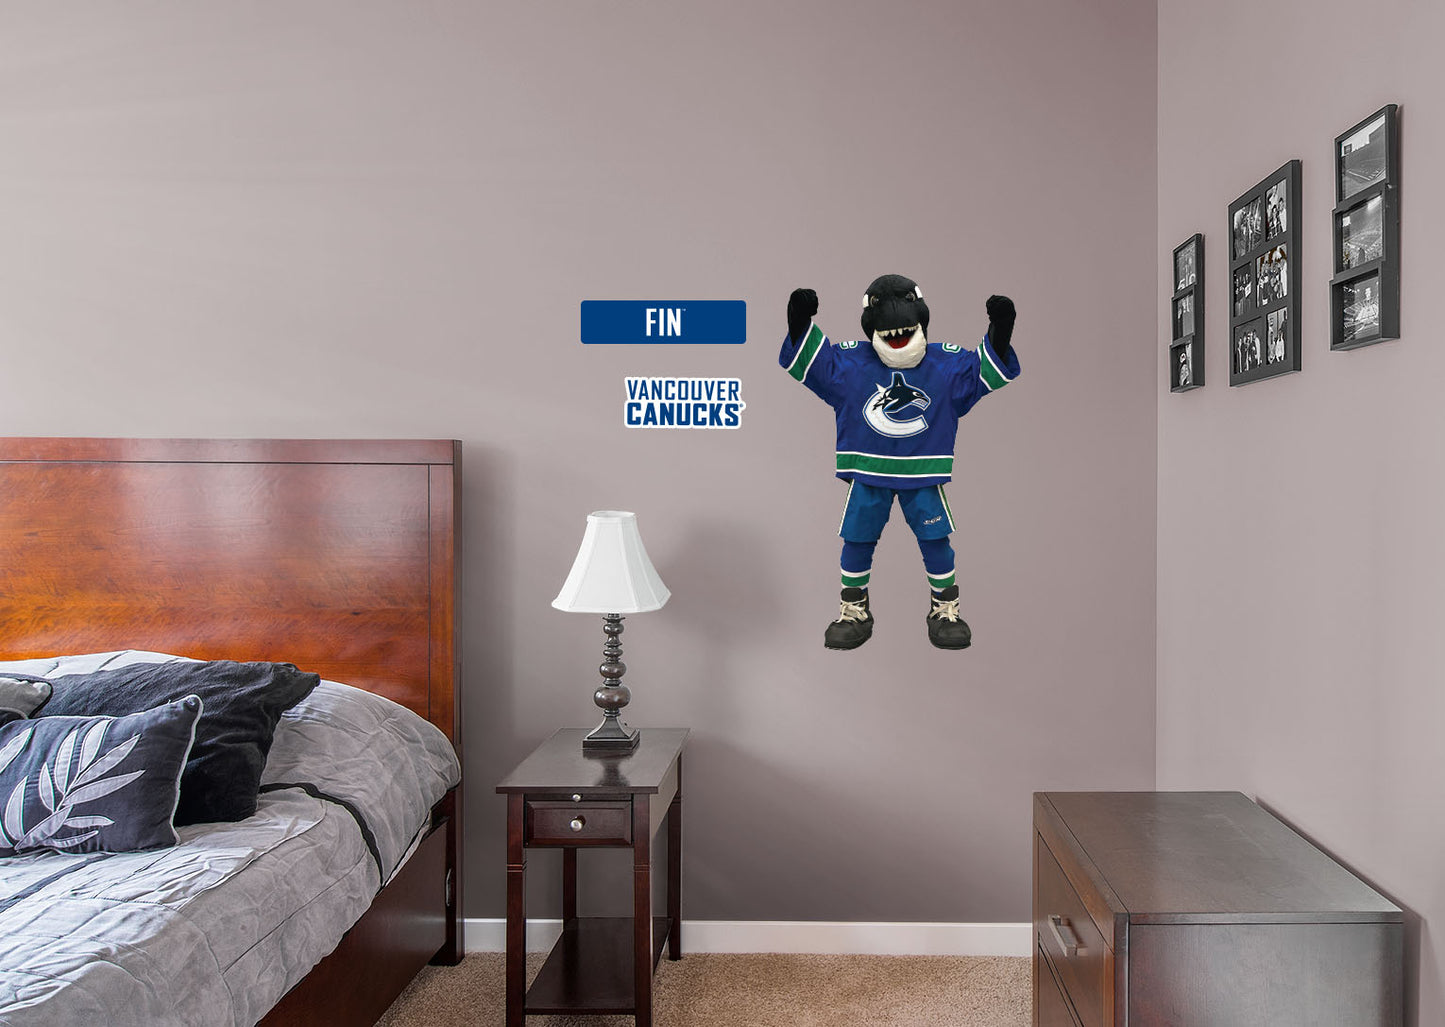 Vancouver Canucks: Fin  Mascot        - Officially Licensed NHL Removable Wall   Adhesive Decal